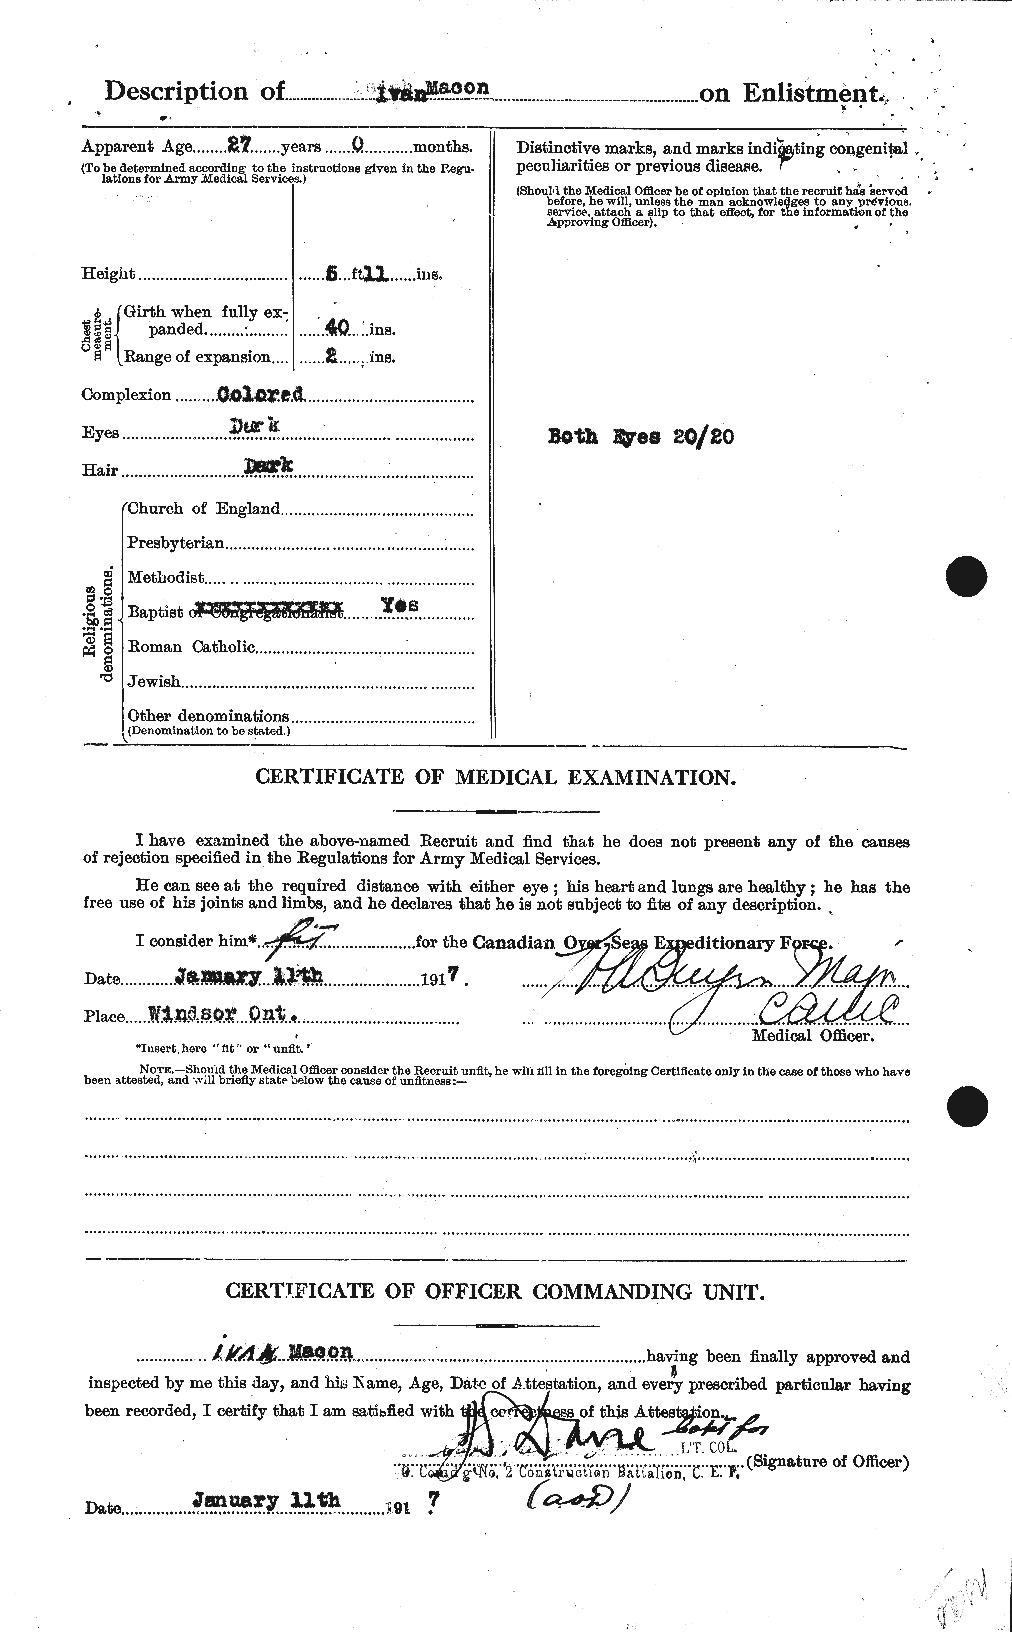 Personnel Records of the First World War - CEF 476455b